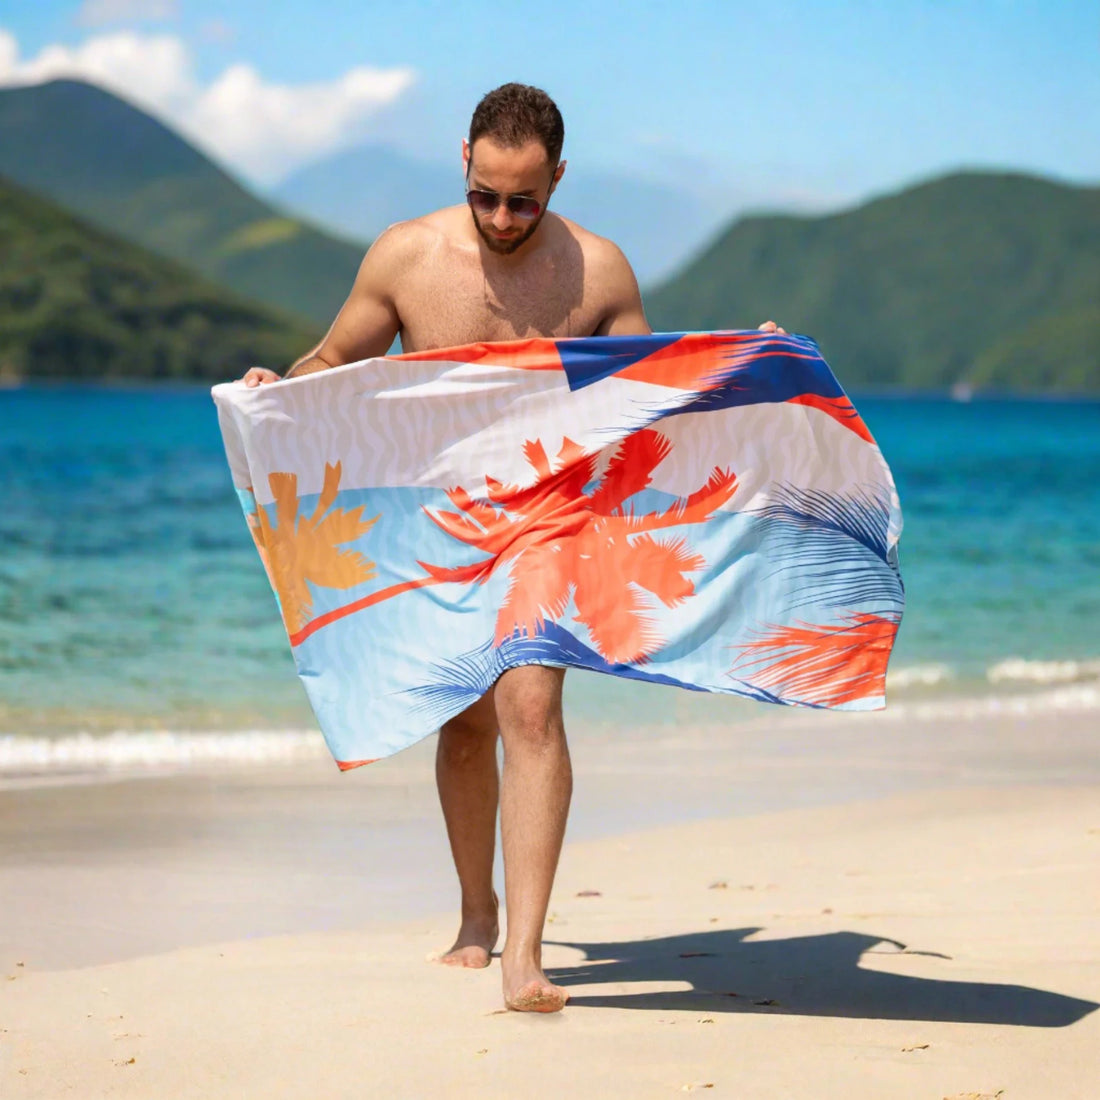 A guy holding a Quick Dry, Sand Free, Light Weight, Compact and Ecofriendly Microfiber Beach Towel from La Toalla